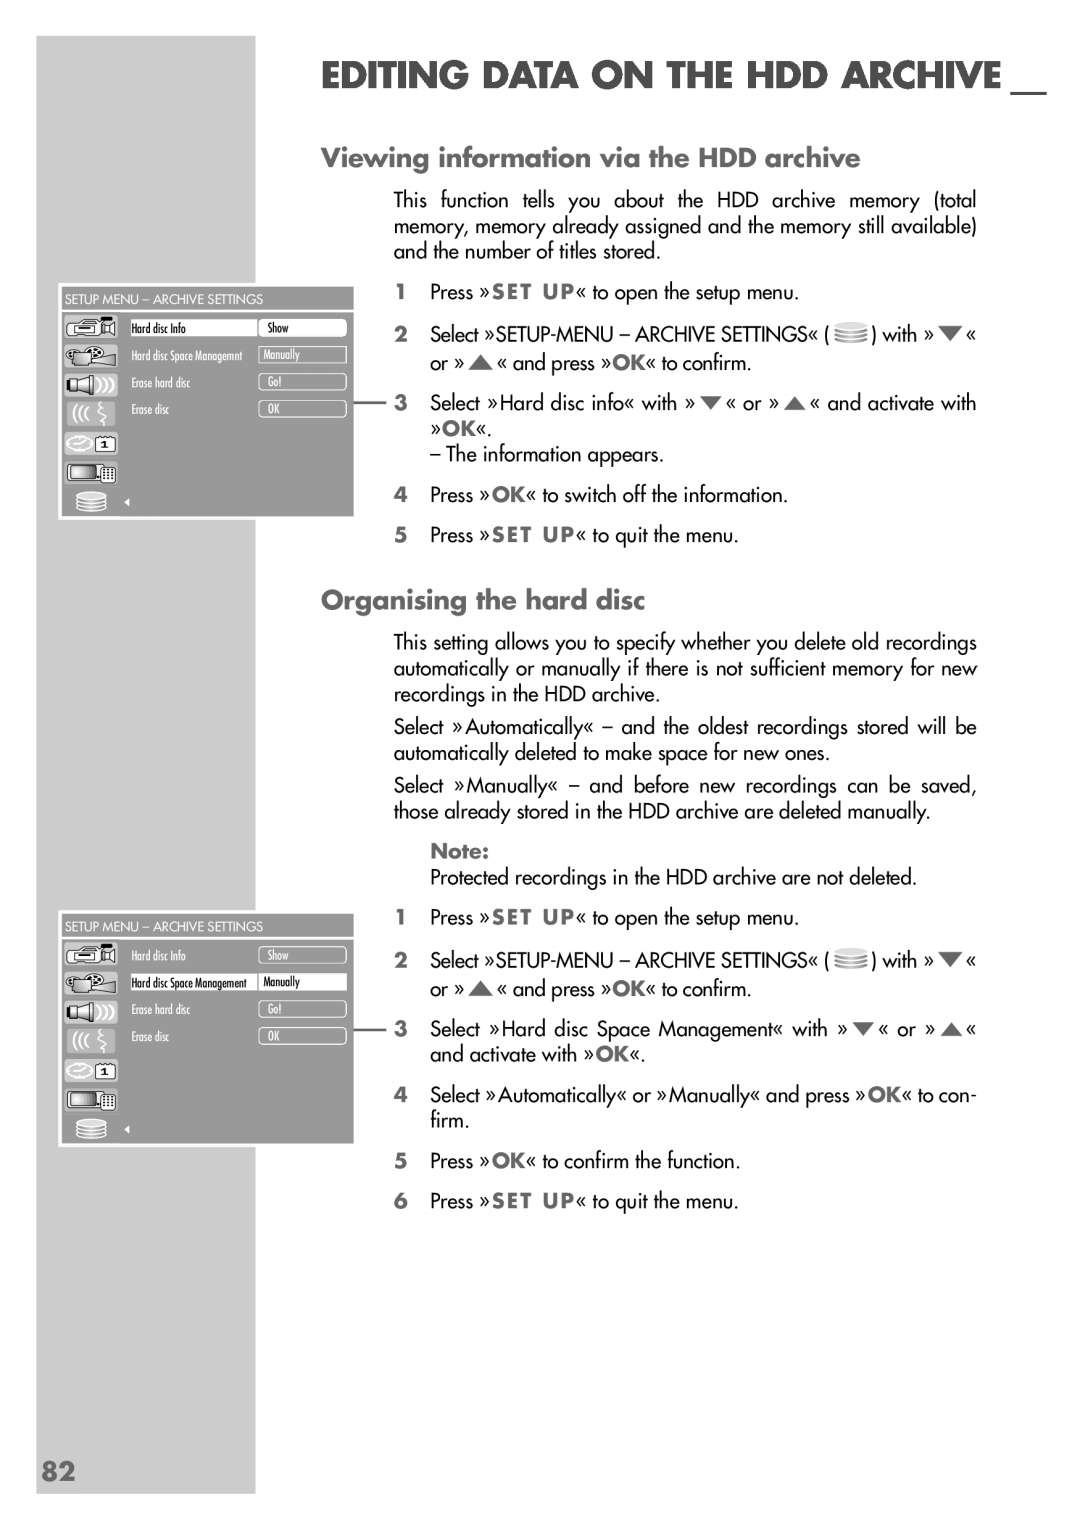 Grundig 5550 HDD manual Viewing information via the HDD archive, Organising the hard disc, Editing Data On The Hdd Archive 